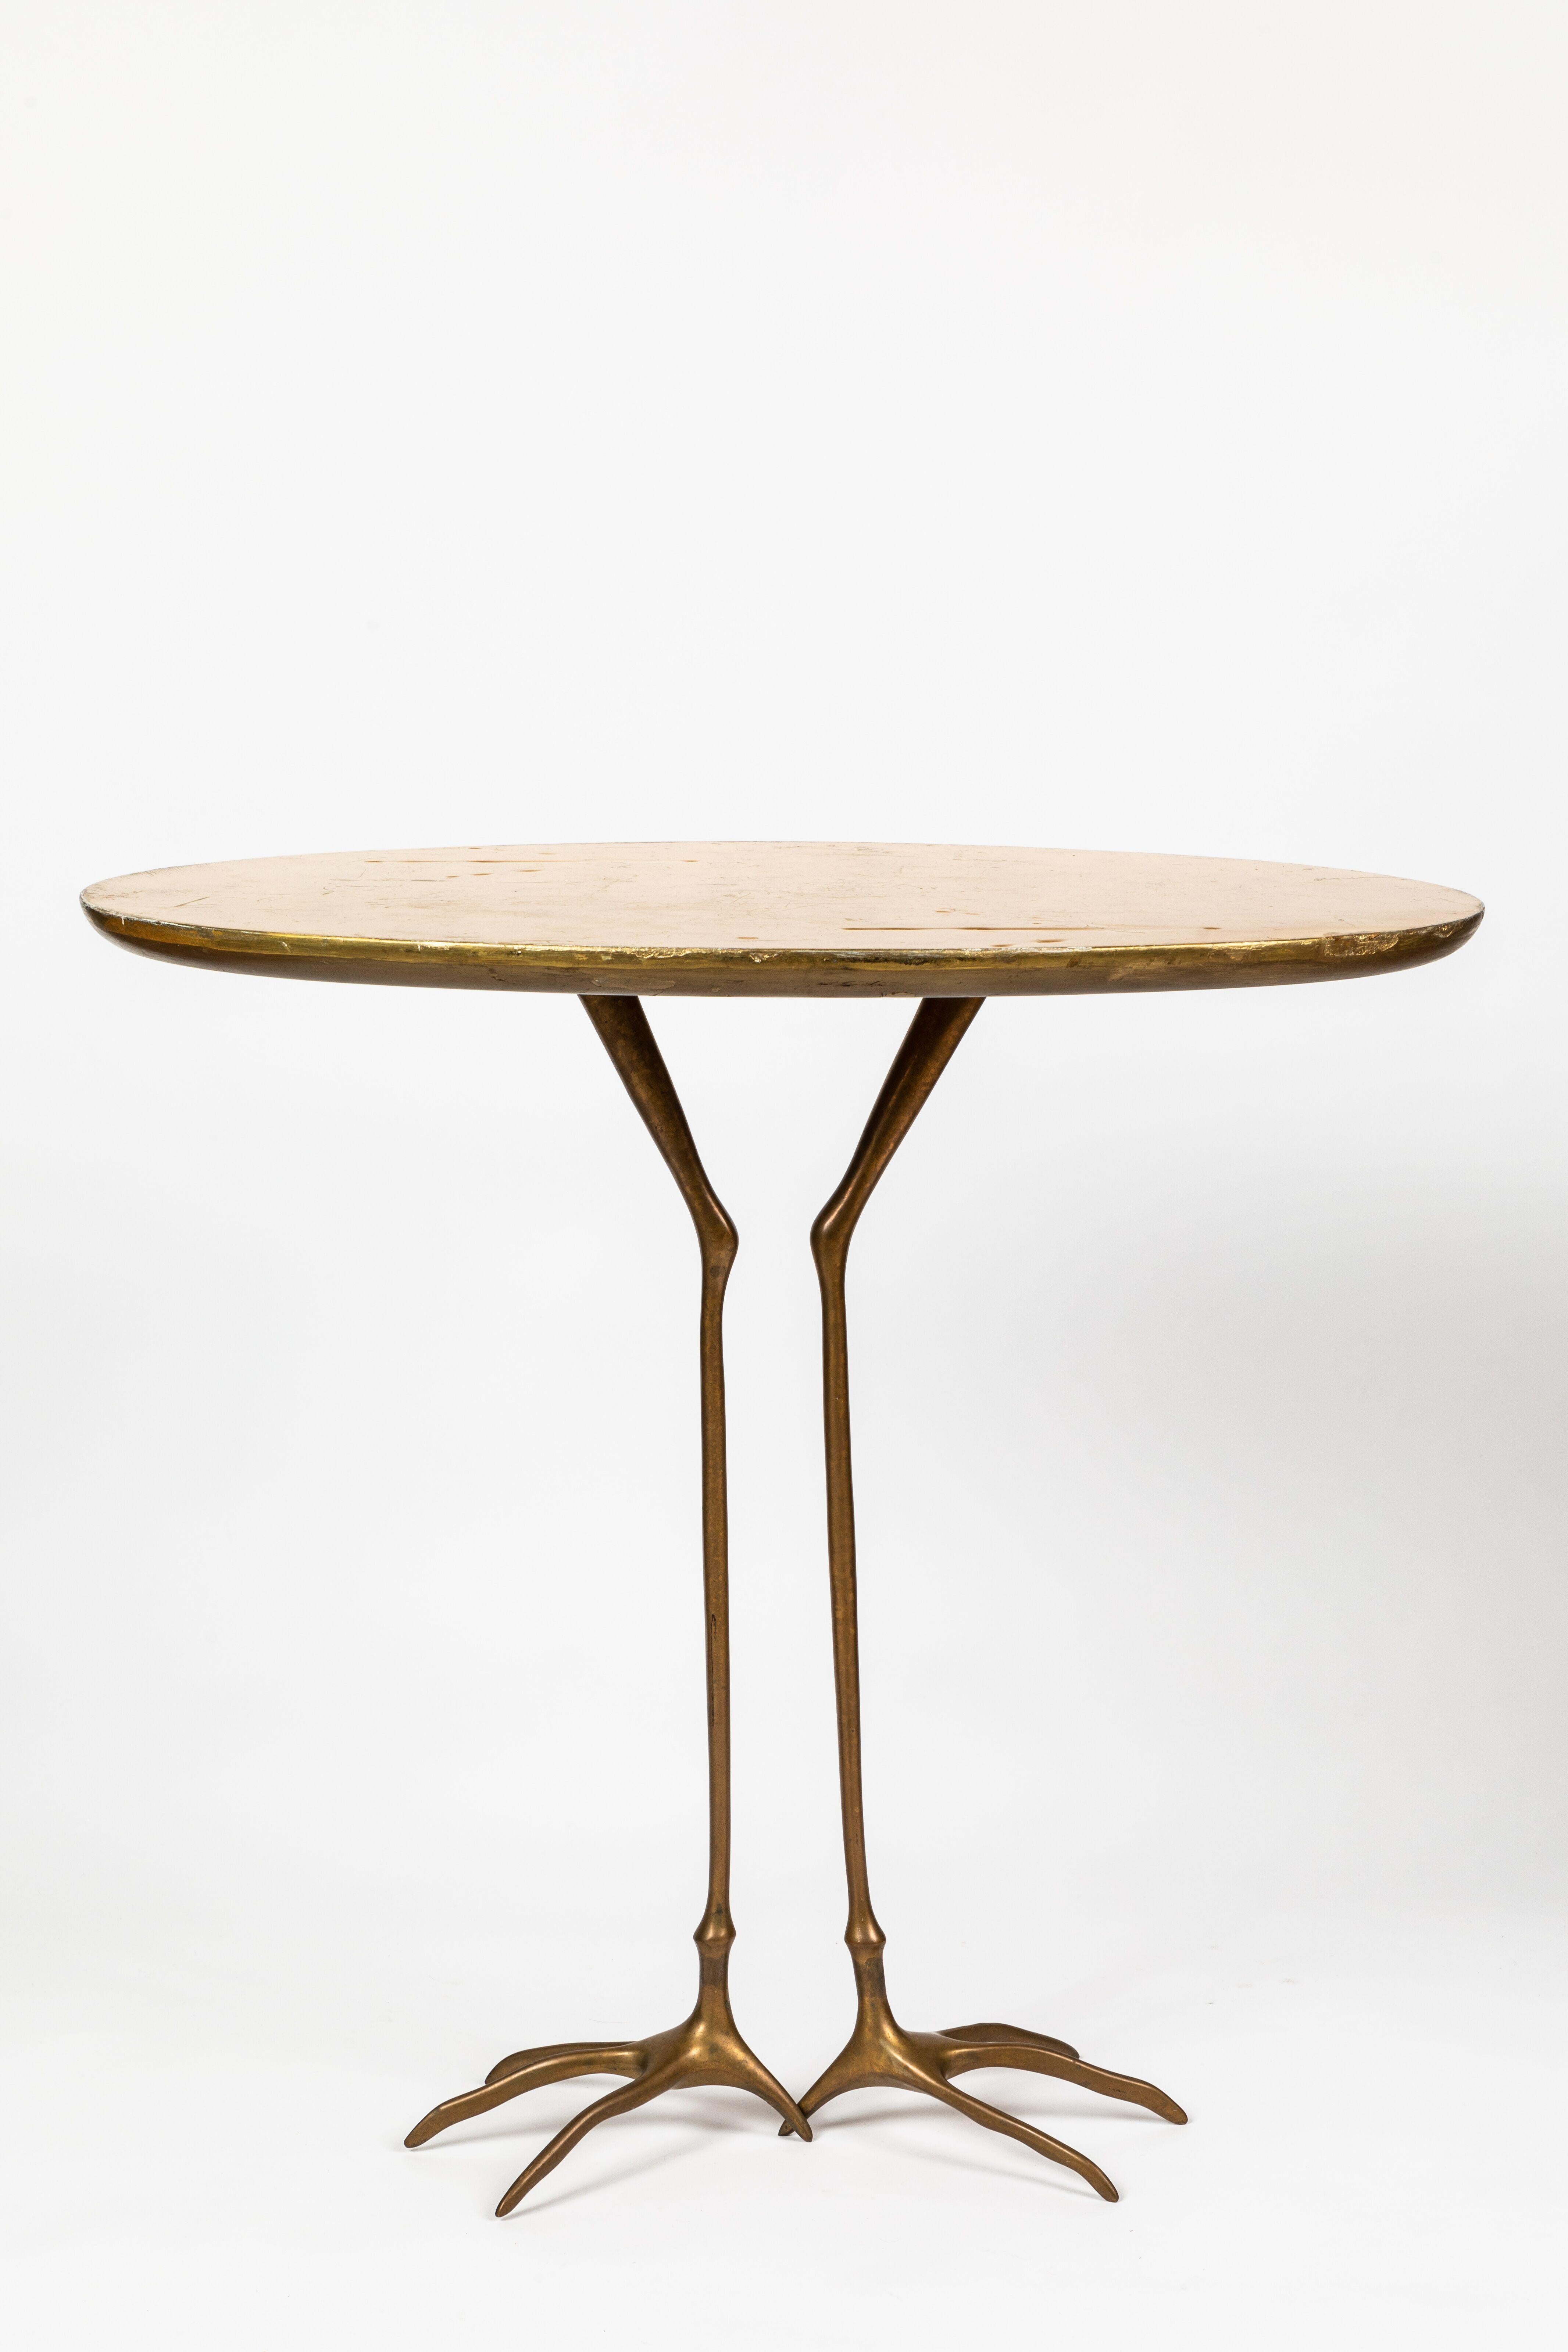 Meret Oppenheim 'Traccia' table, Italy, Circa 1972.
Méret Oppenheim for Cassina.
Bronze base with oval gold leaf and wood top.
Bird foot imprints on the top.
Measures: 26.5